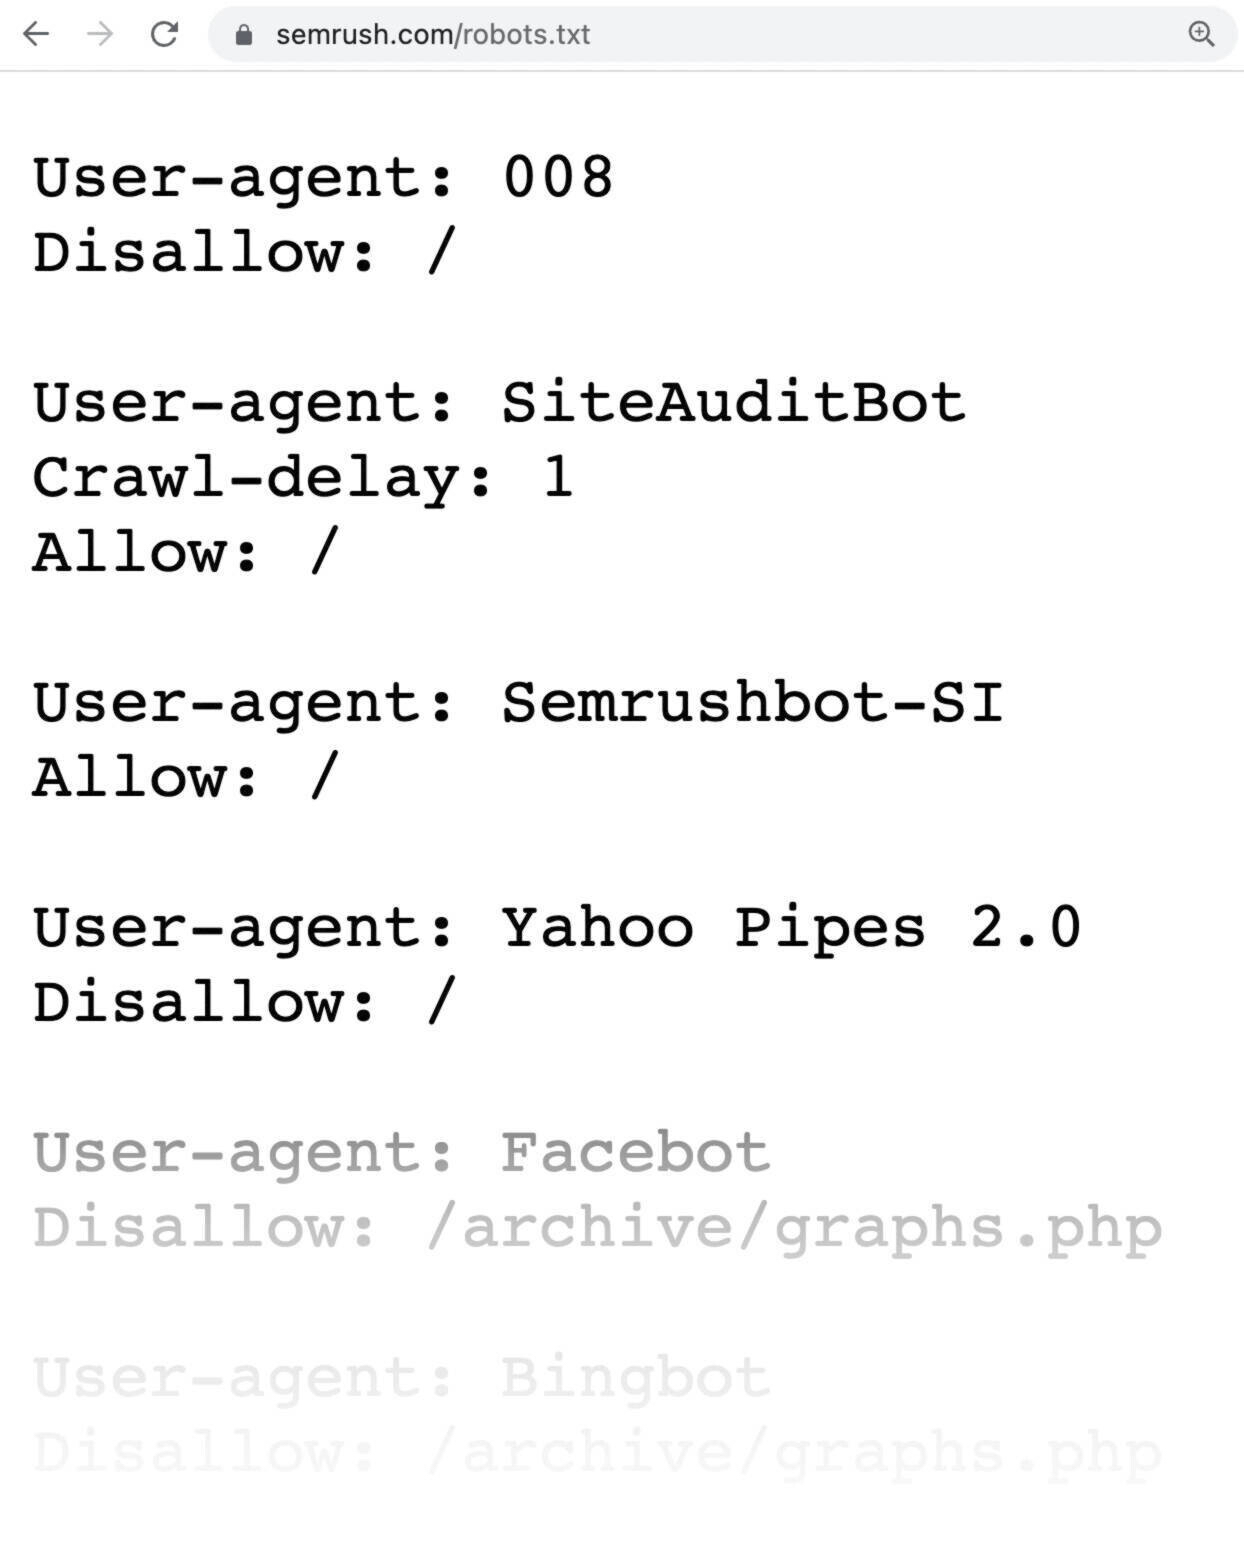 An example of a robots.txt file